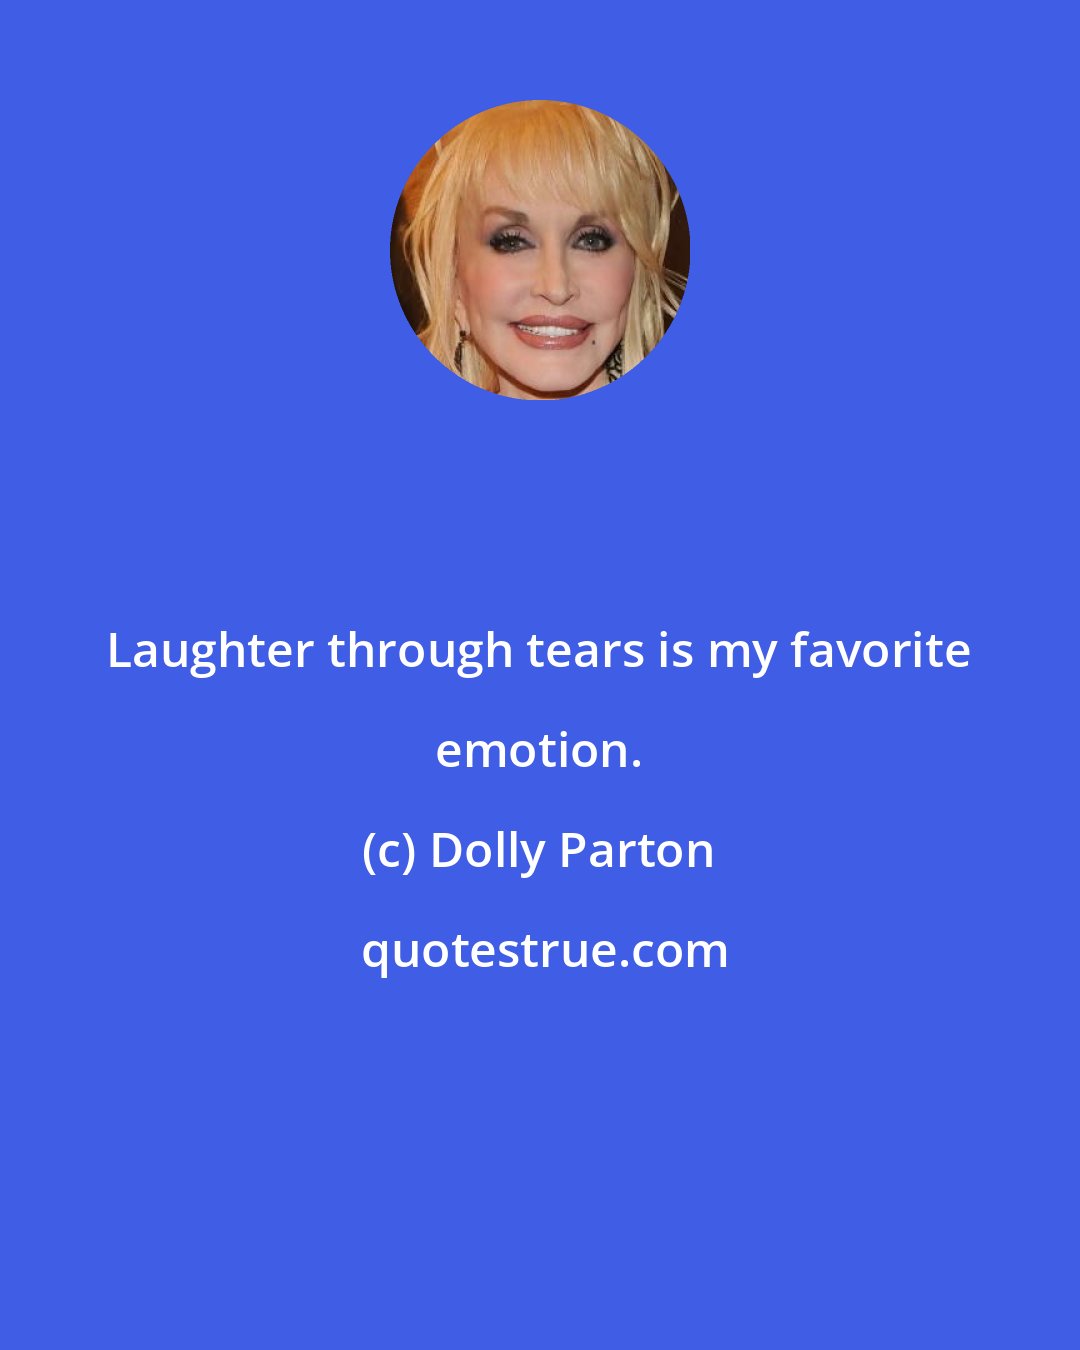 Dolly Parton: Laughter through tears is my favorite emotion.